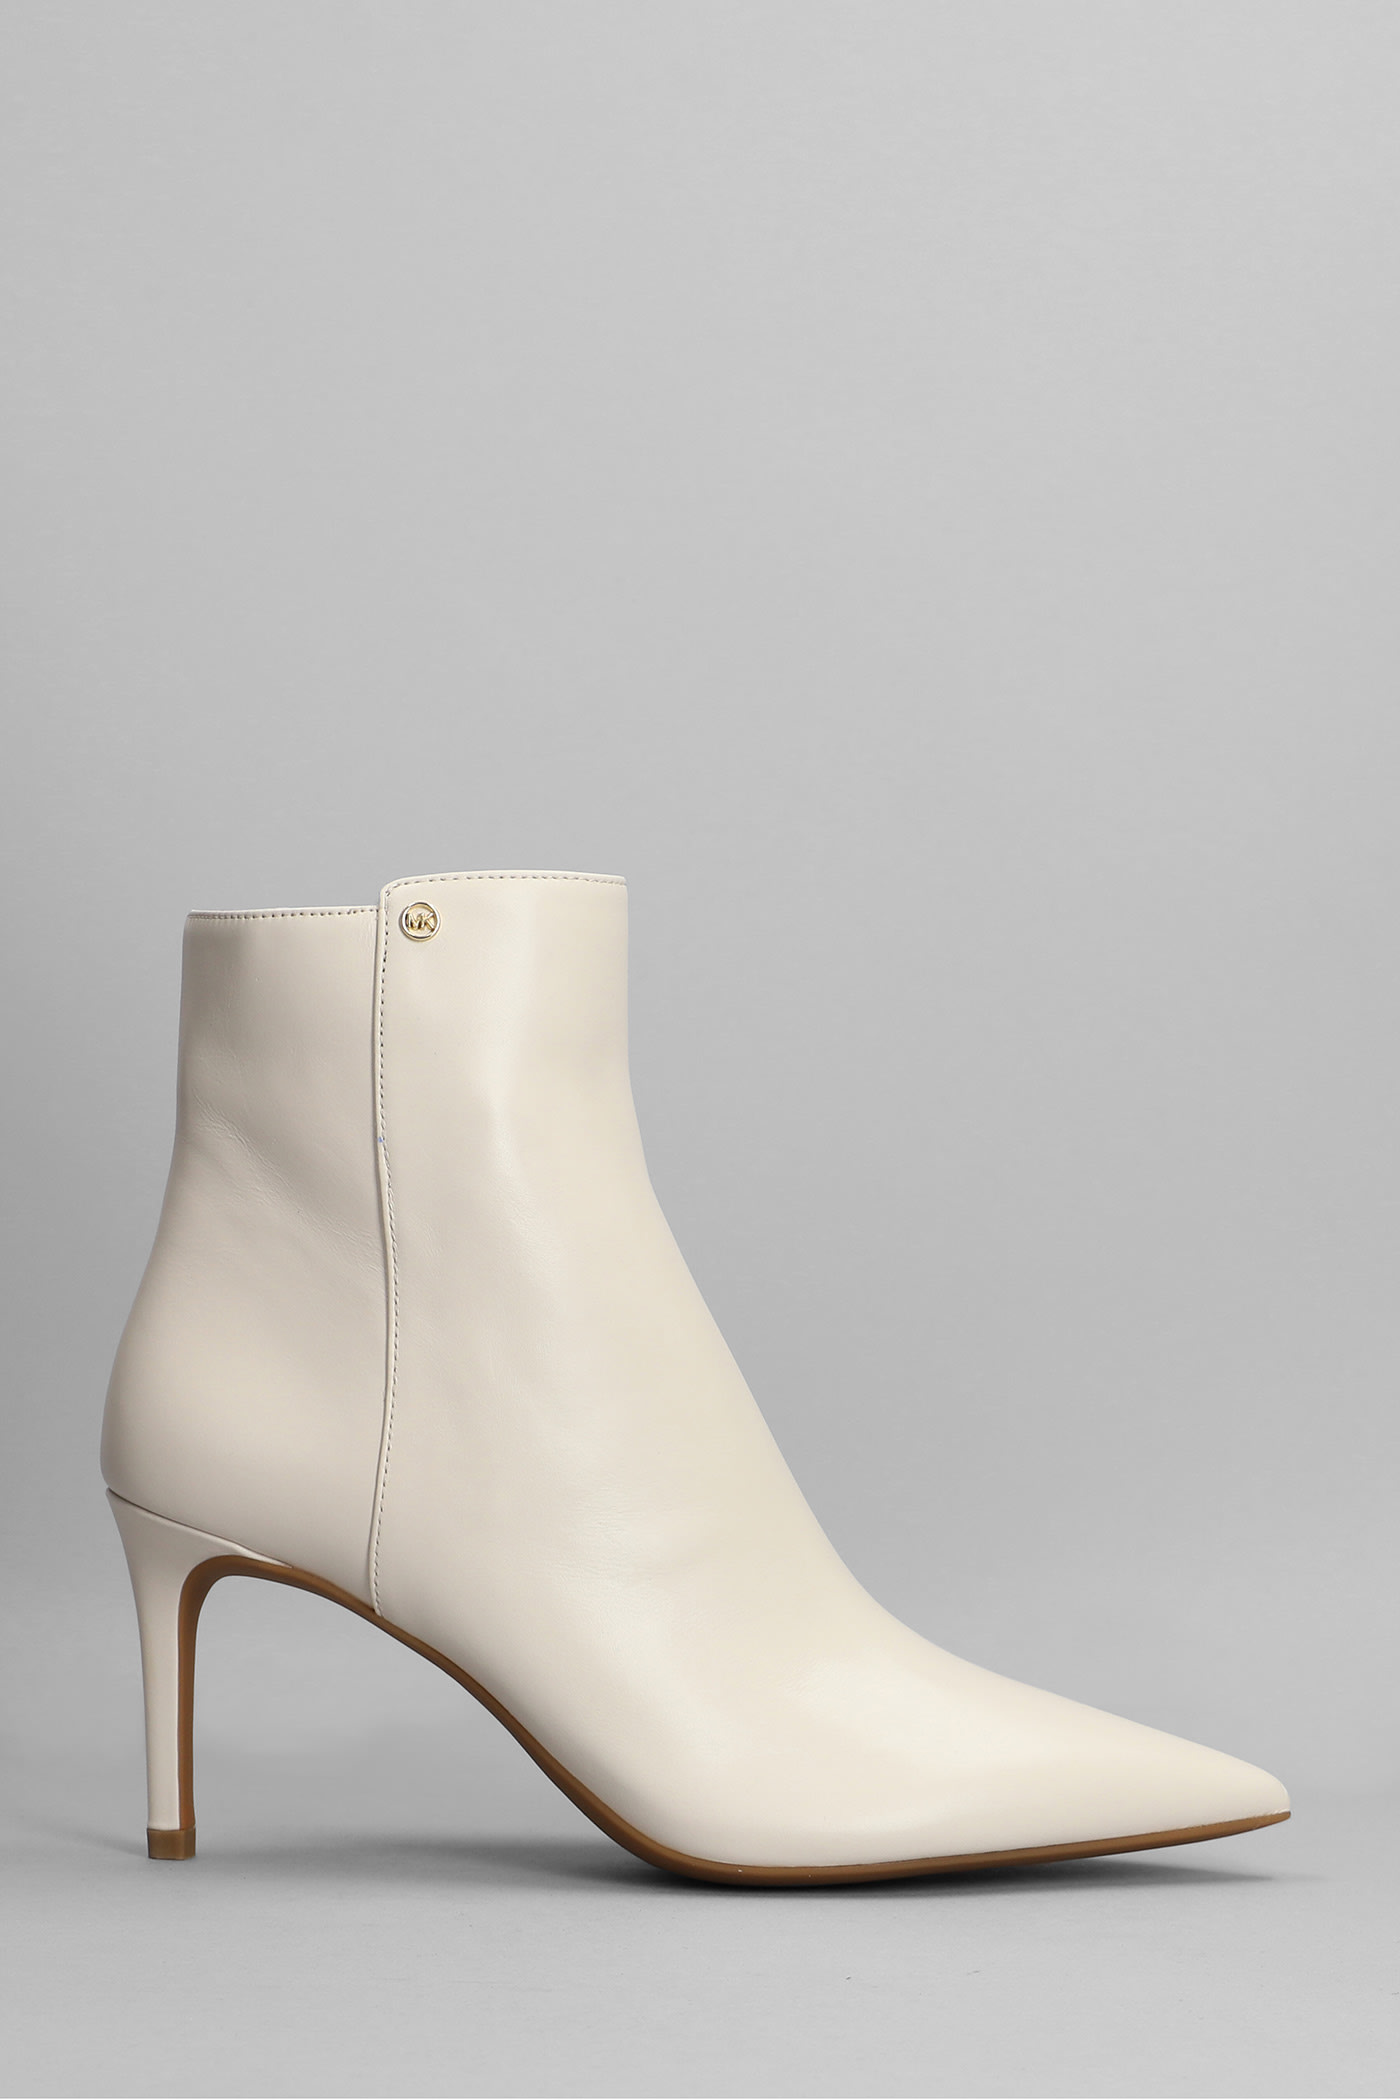 Michael Kors Alina High Heels Ankle Boots In Beige Leather